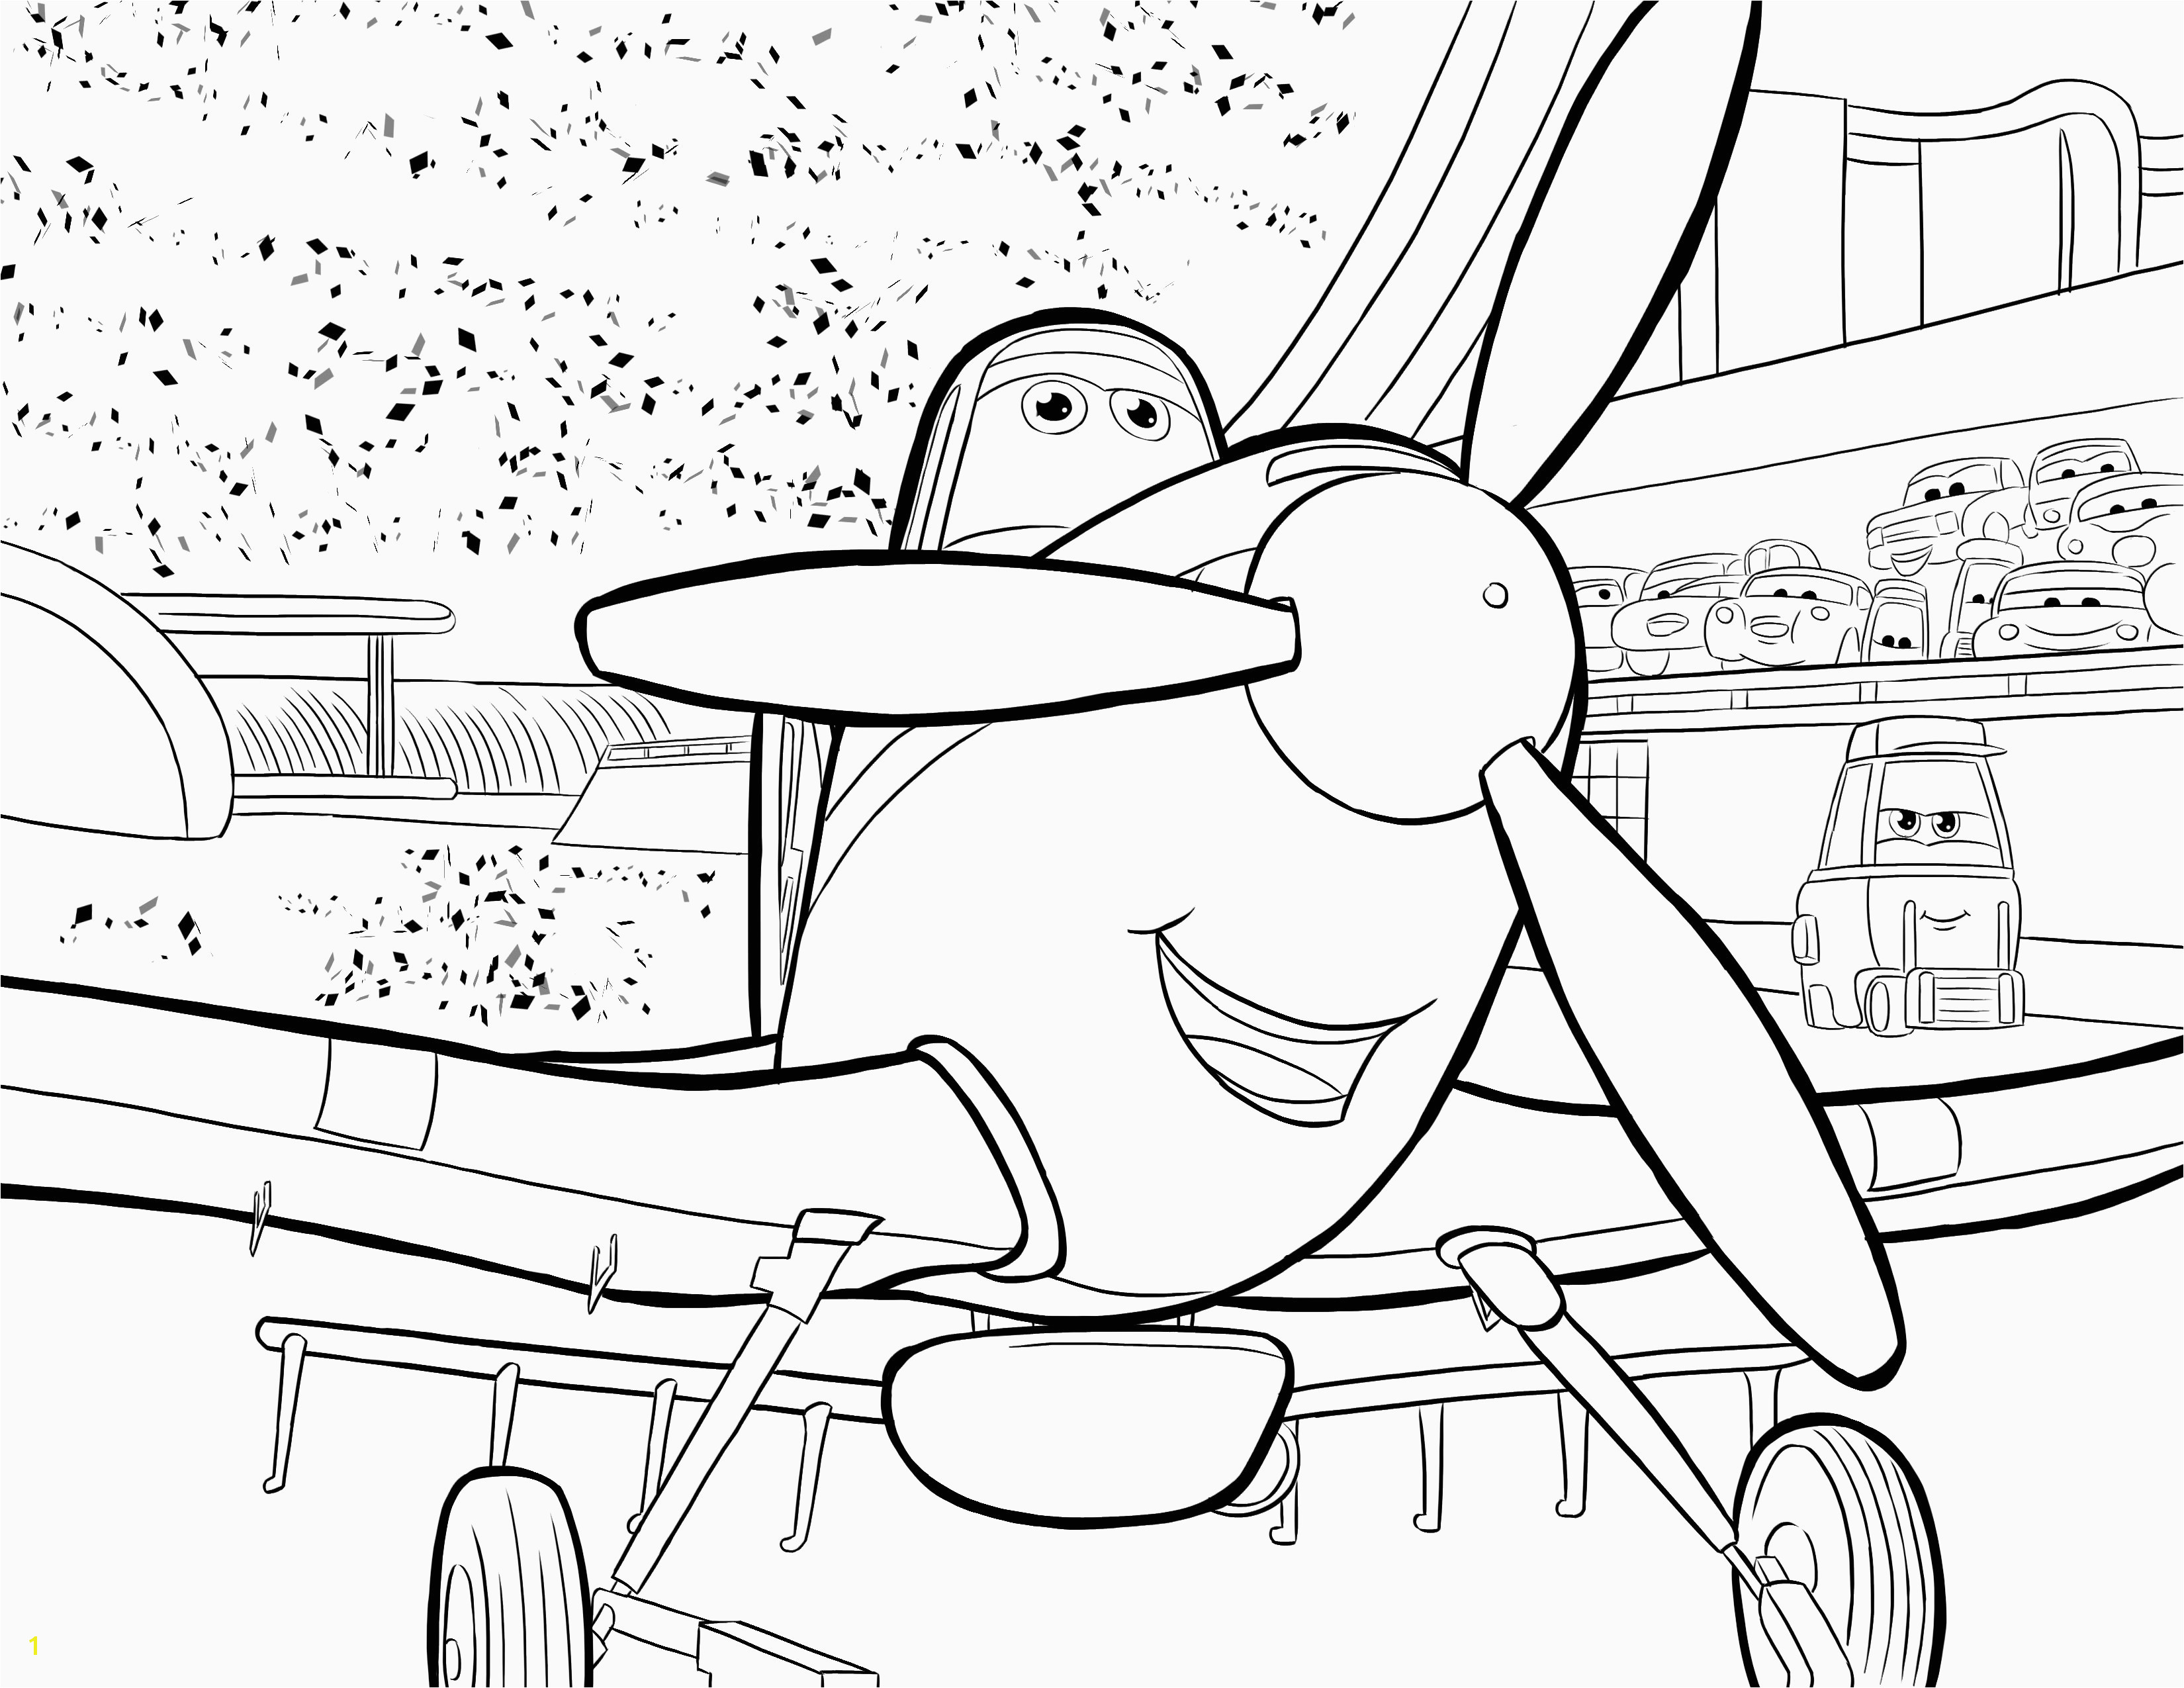 Pixar Planes Coloring Pages Inspirational Free Rabbit Coloring Pages Fresh Cool Colouring Ins Unique Cool Od